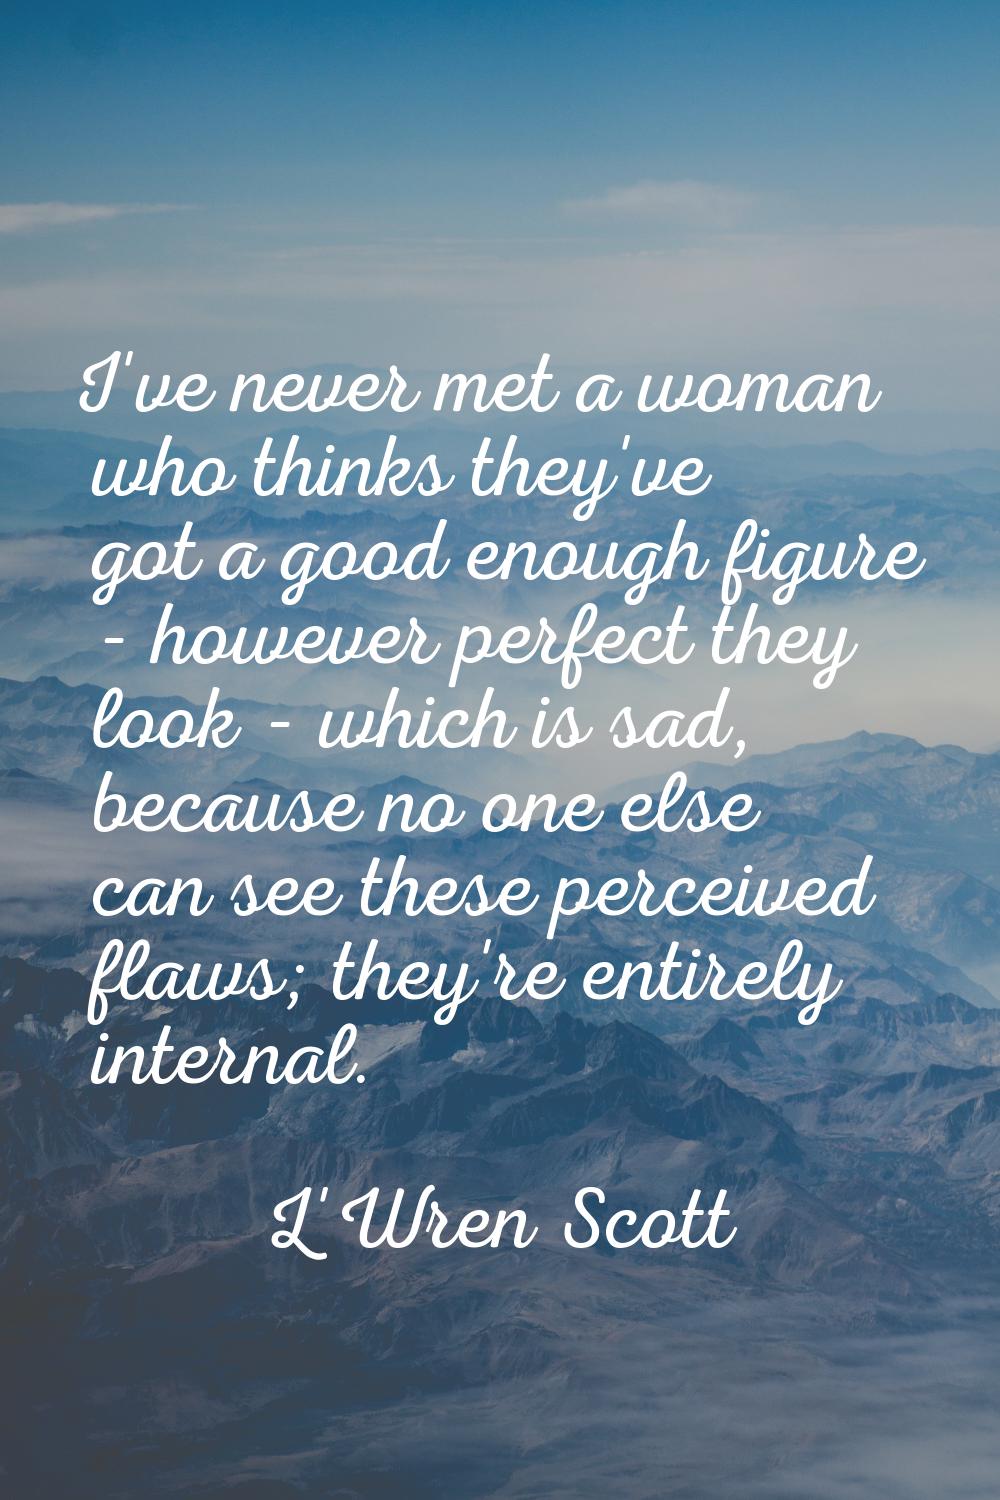 I've never met a woman who thinks they've got a good enough figure - however perfect they look - wh